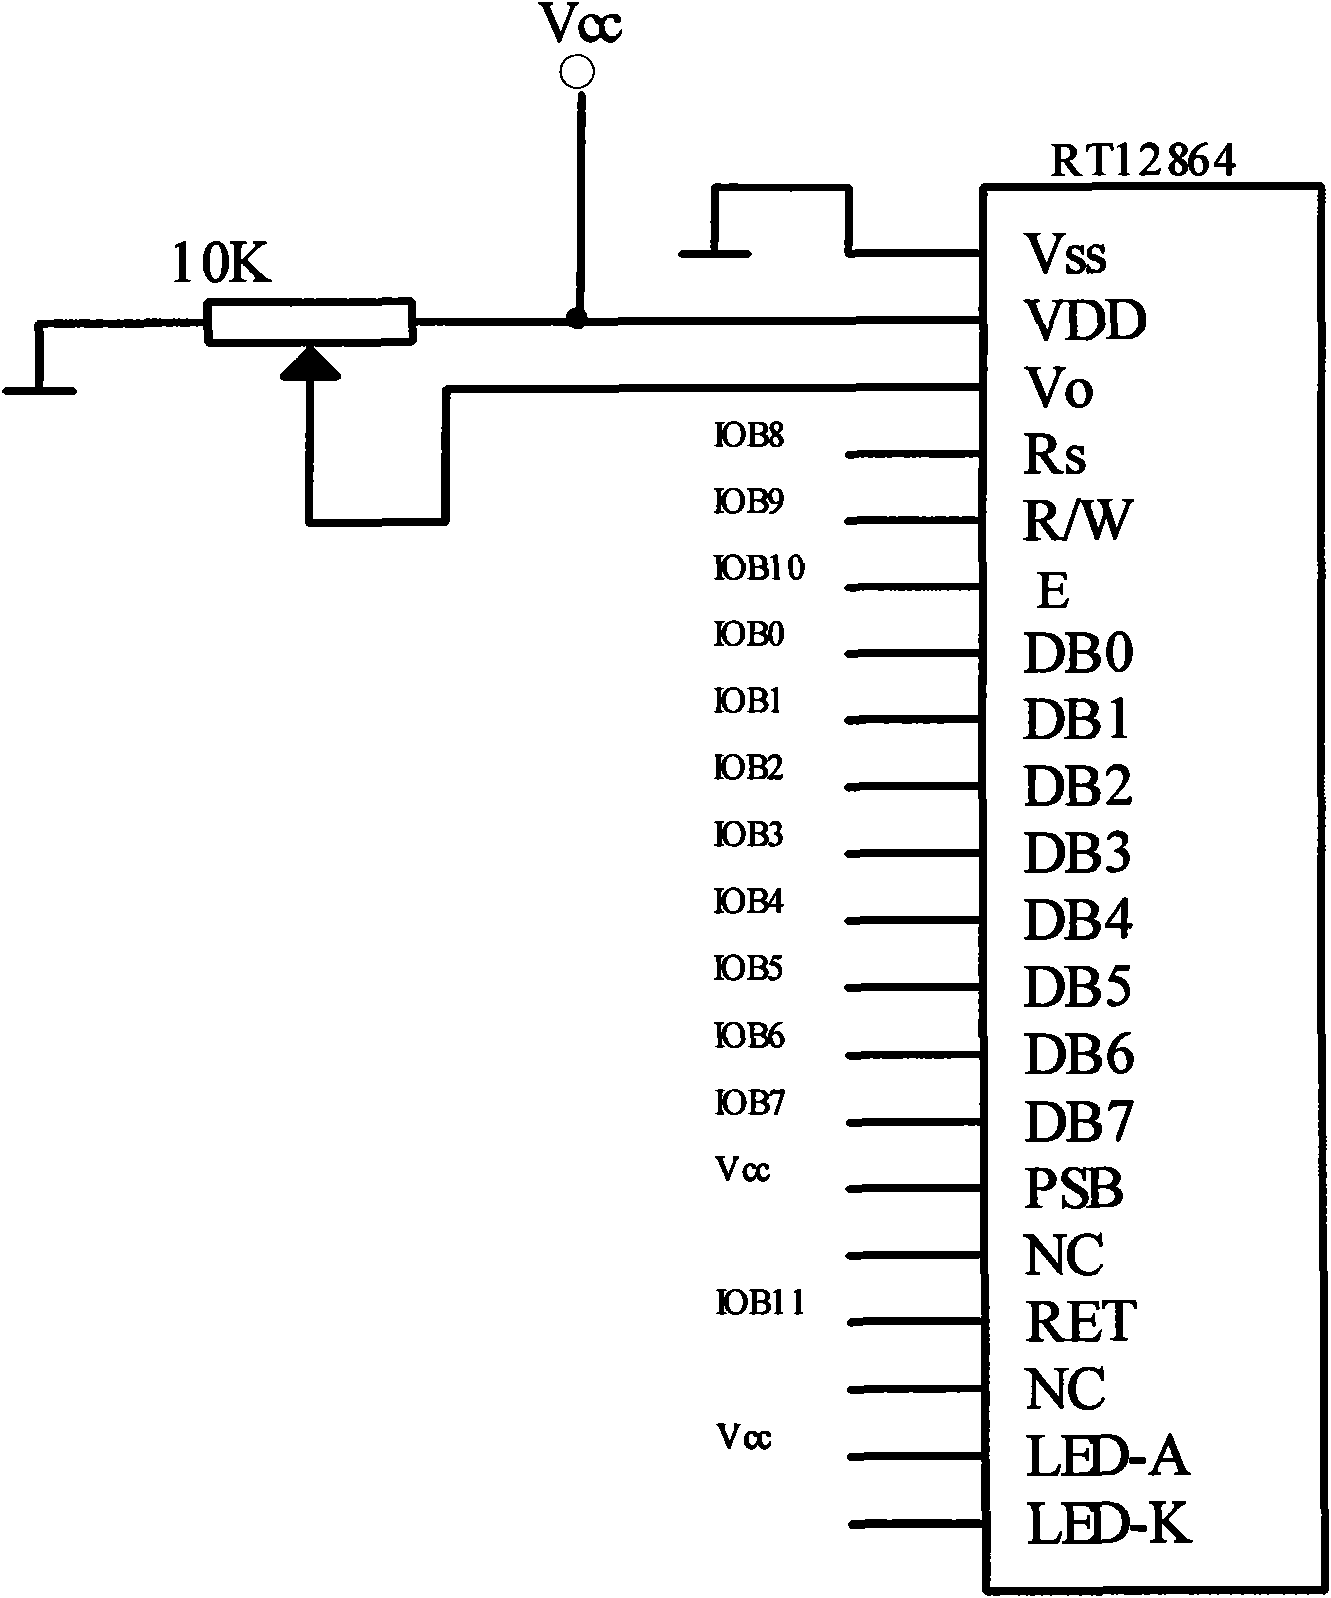 Design of singlechip-controlled switch power